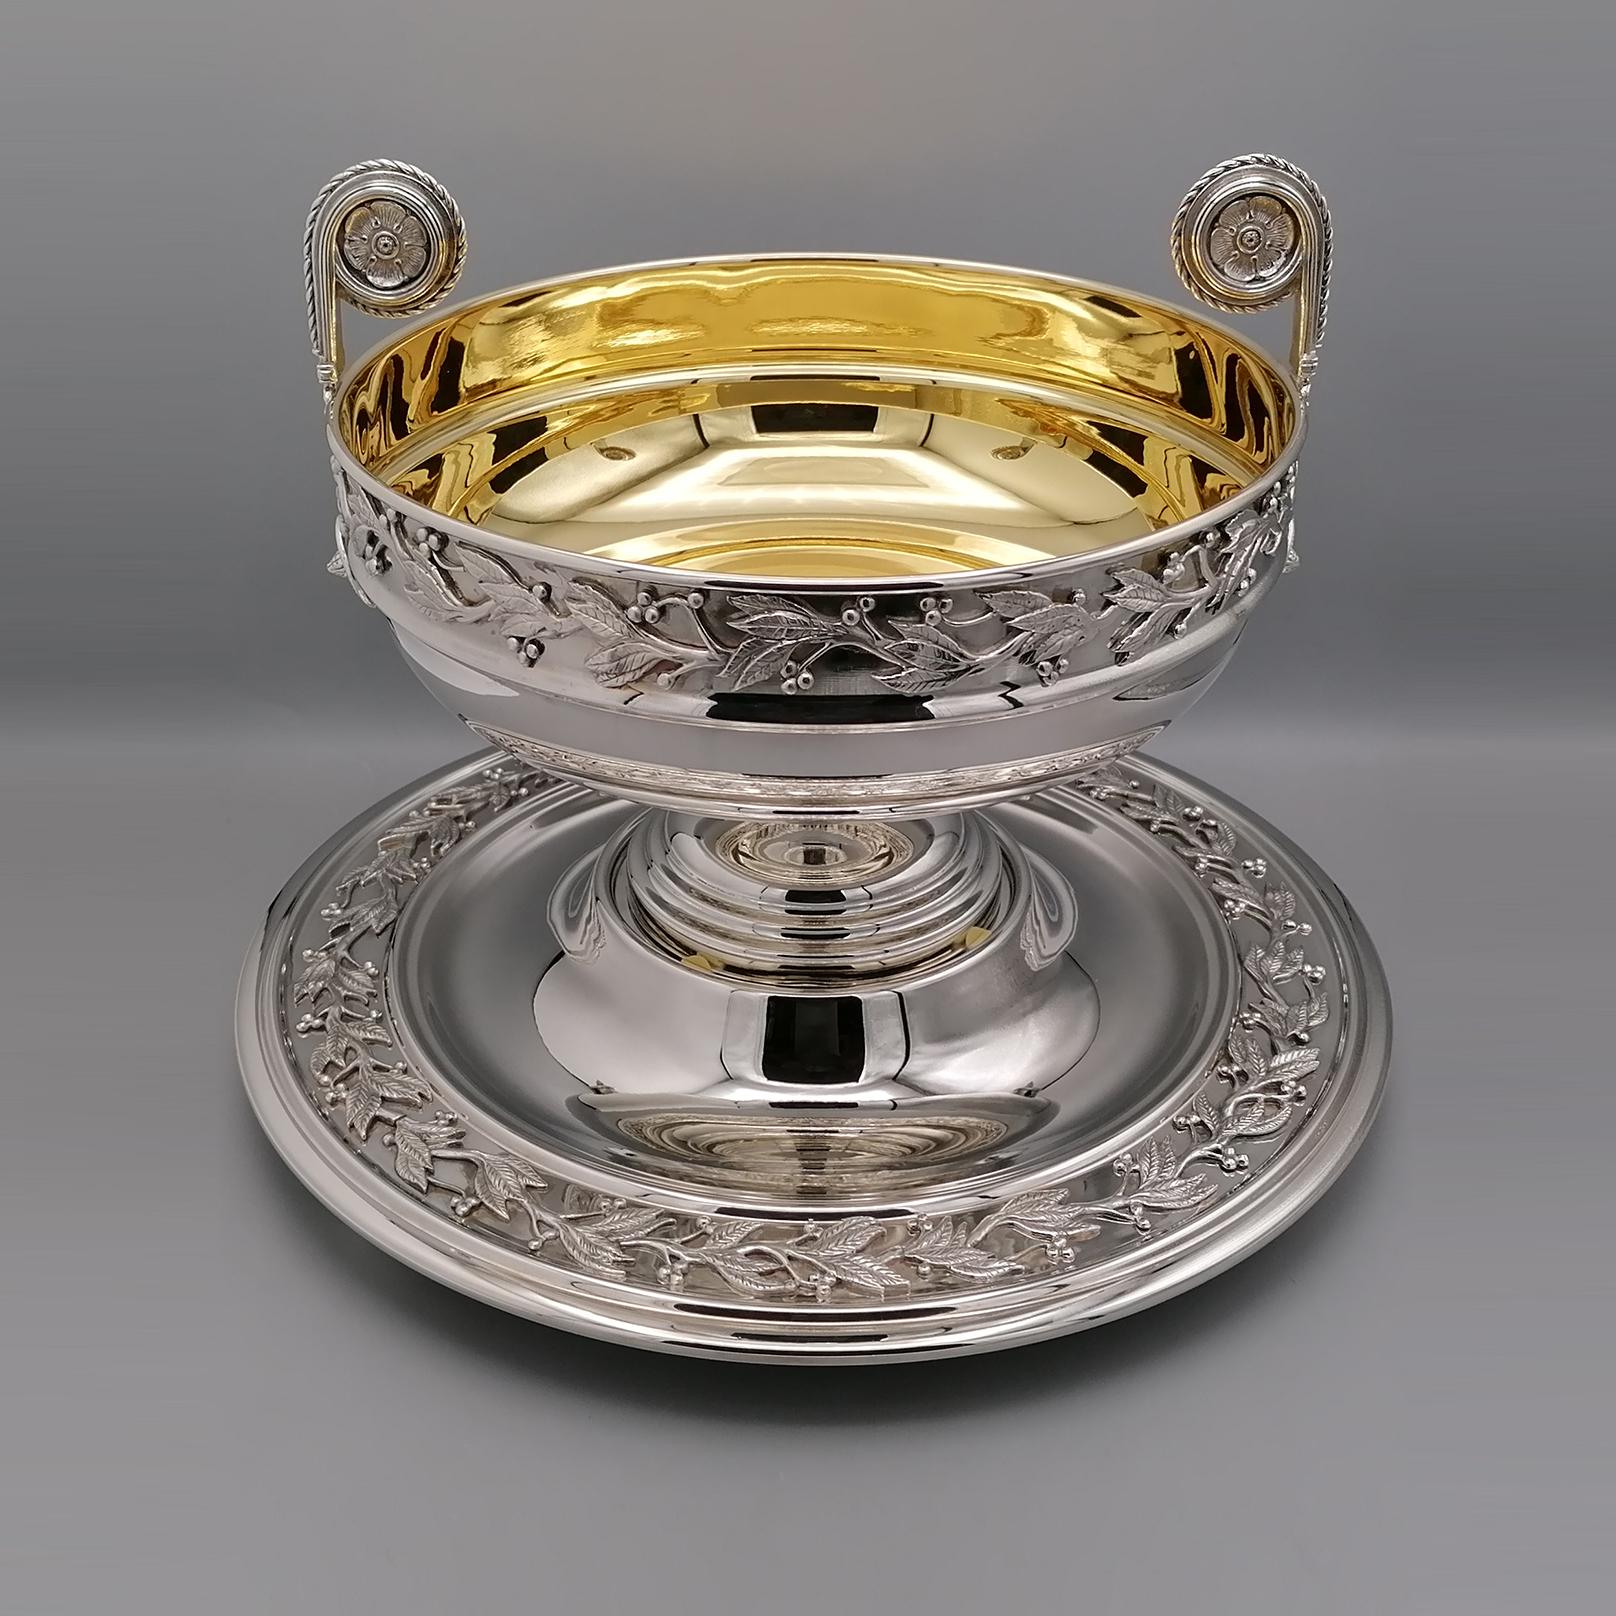 Centerpiece with plate made of 800 solid silver in Renaissance style. 
The centerpiece was made love with different processing methods. 
The predominant method is handcrafting, which makes it precious and unique. 
Leaves and olives are being made by